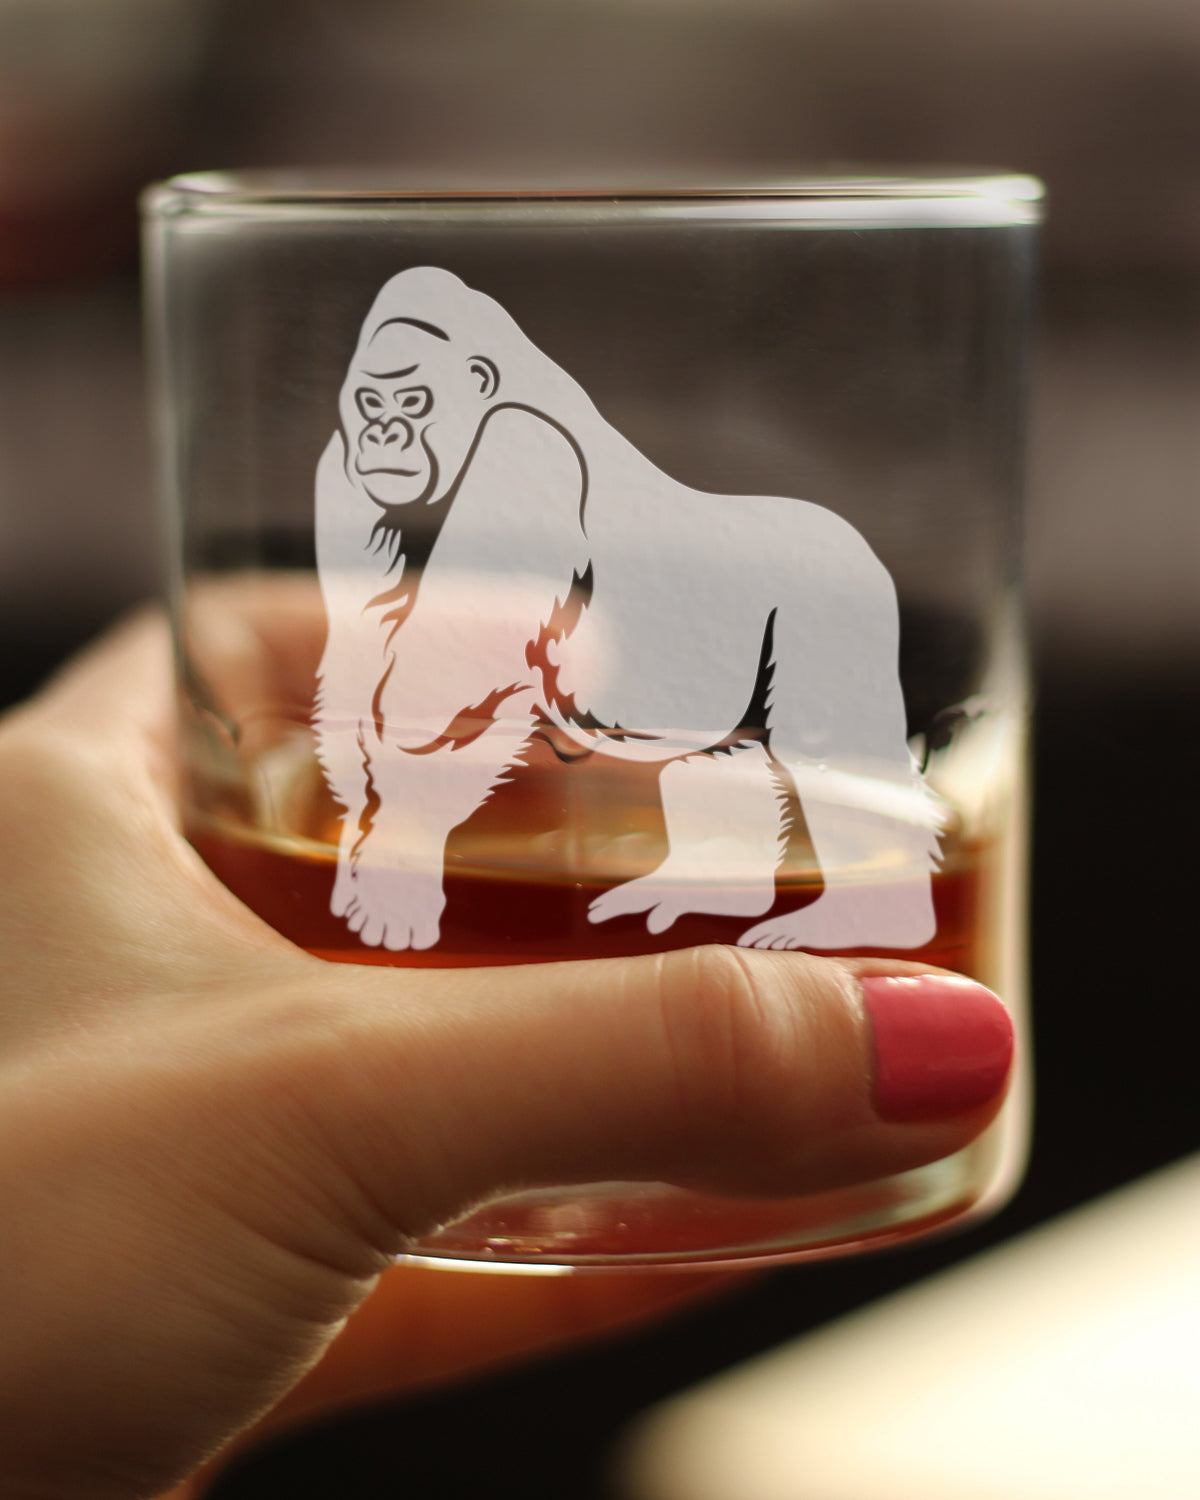 Gorilla Rocks Glass - Fun Wild Animal Themed Decor and Gifts for Lovers of Apes and Monkeys - 10.25 Oz Glasses